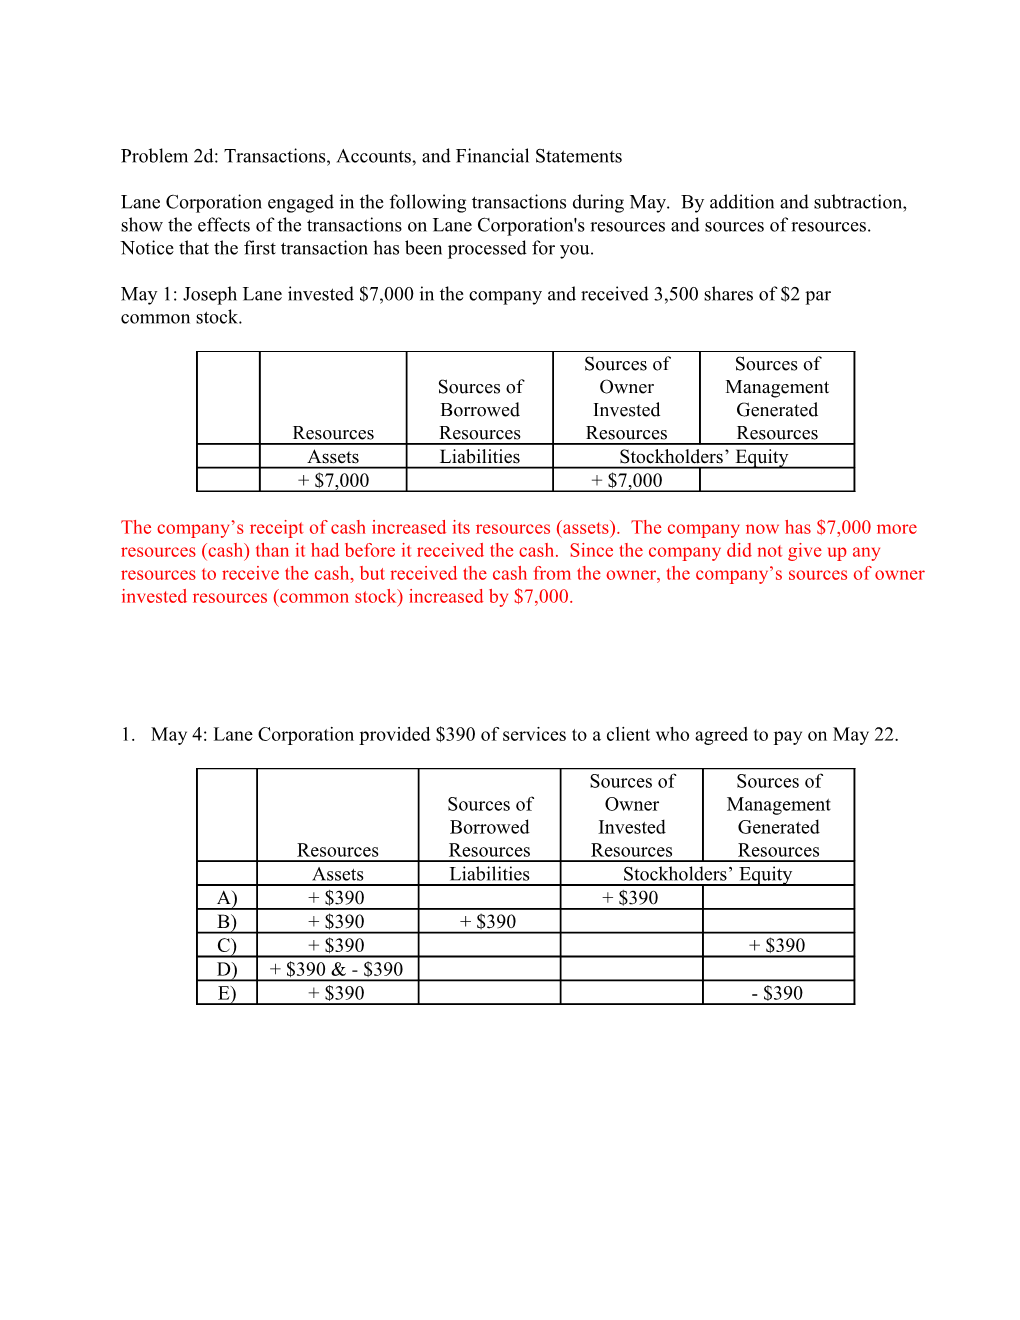 Problem 2D: Transactions, Accounts, and Financial Statements